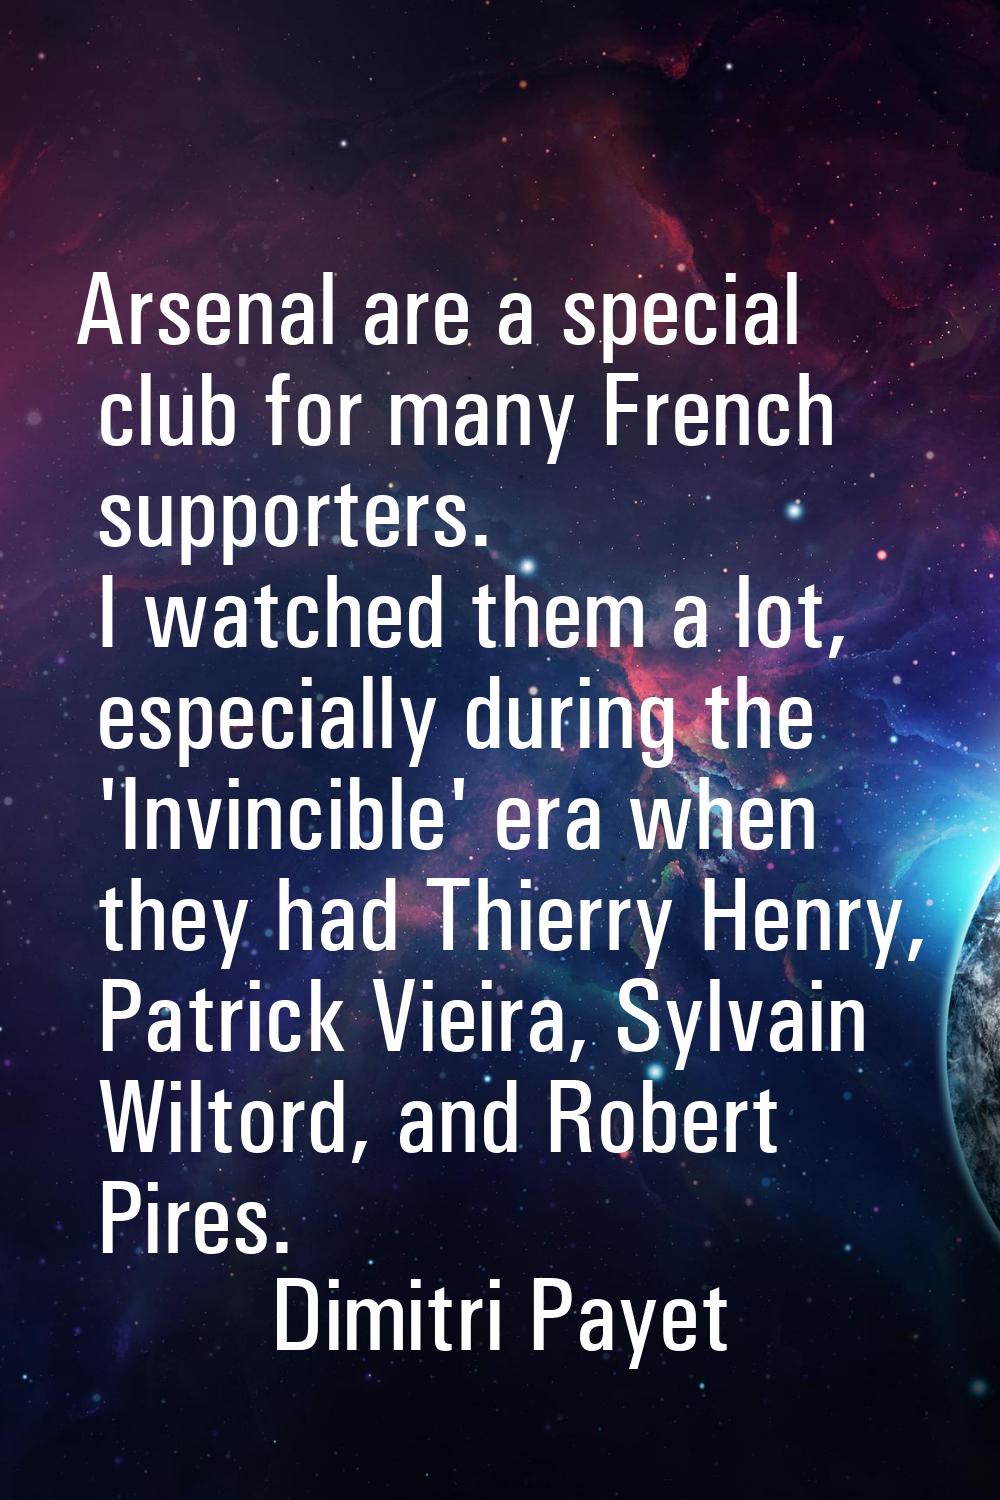 Arsenal are a special club for many French supporters. I watched them a lot, especially during the 